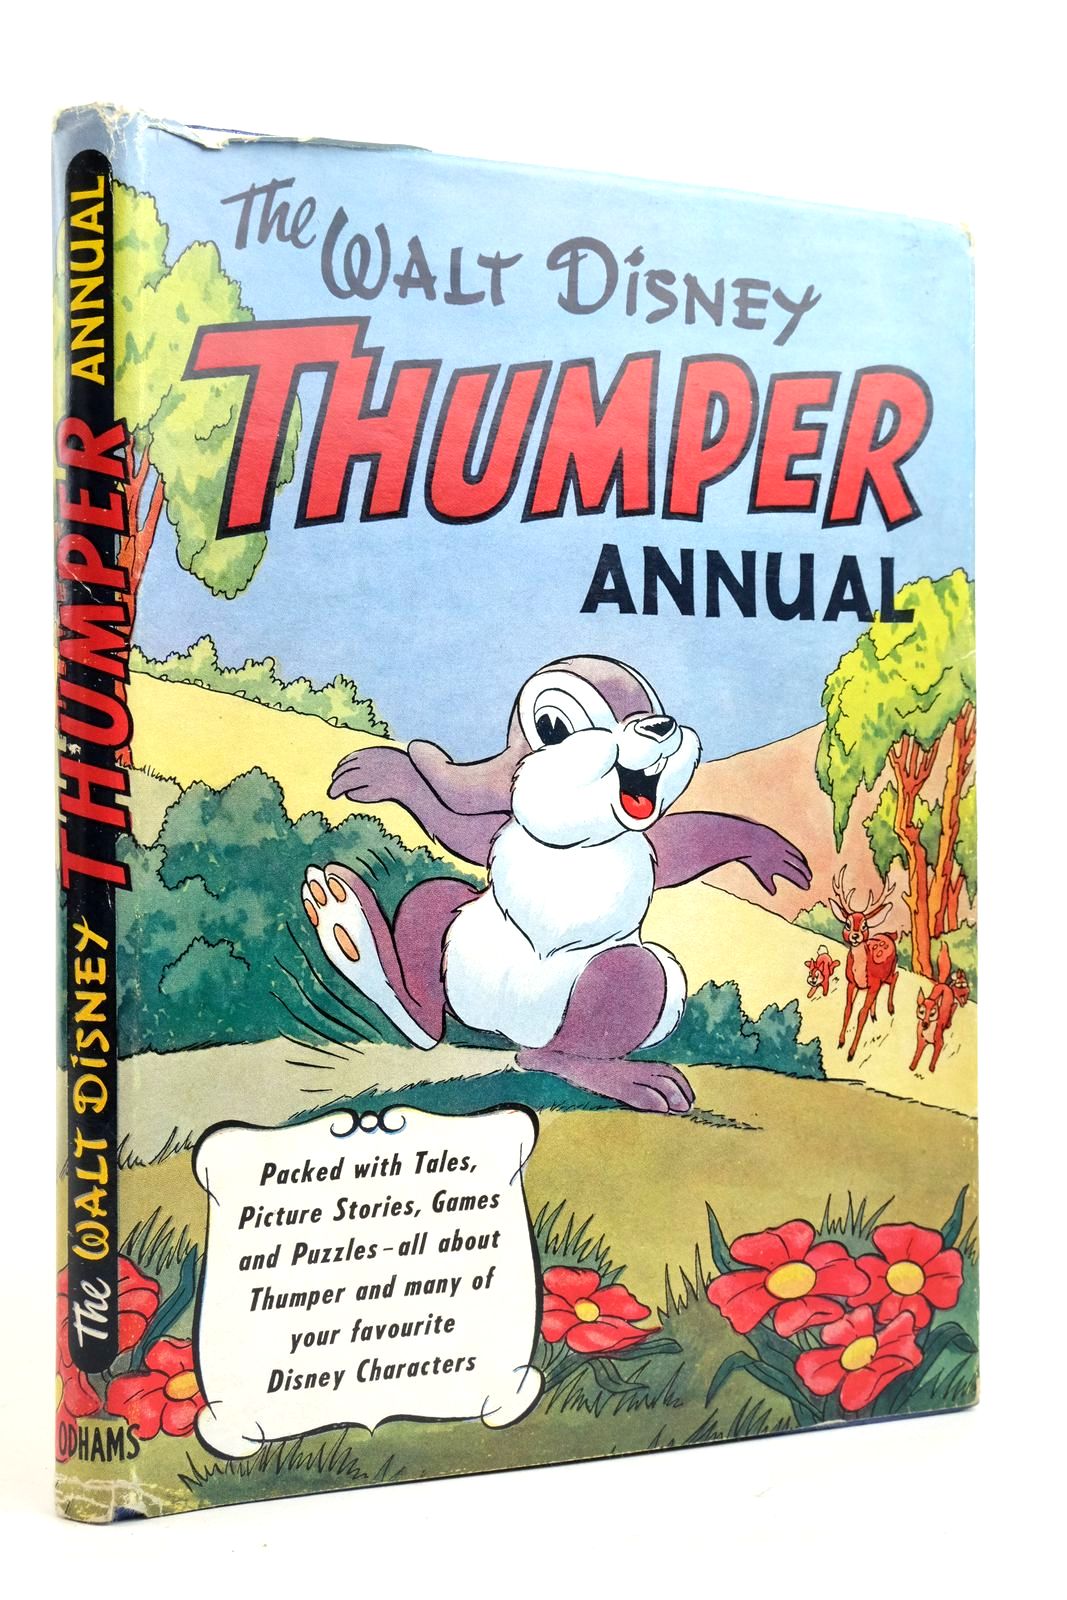 Photo of THE WALT DISNEY THUMPER ANNUAL written by Disney, Walt Taylor, R.H. illustrated by Disney, Walt published by Odhams Press Limited (STOCK CODE: 2136163)  for sale by Stella & Rose's Books